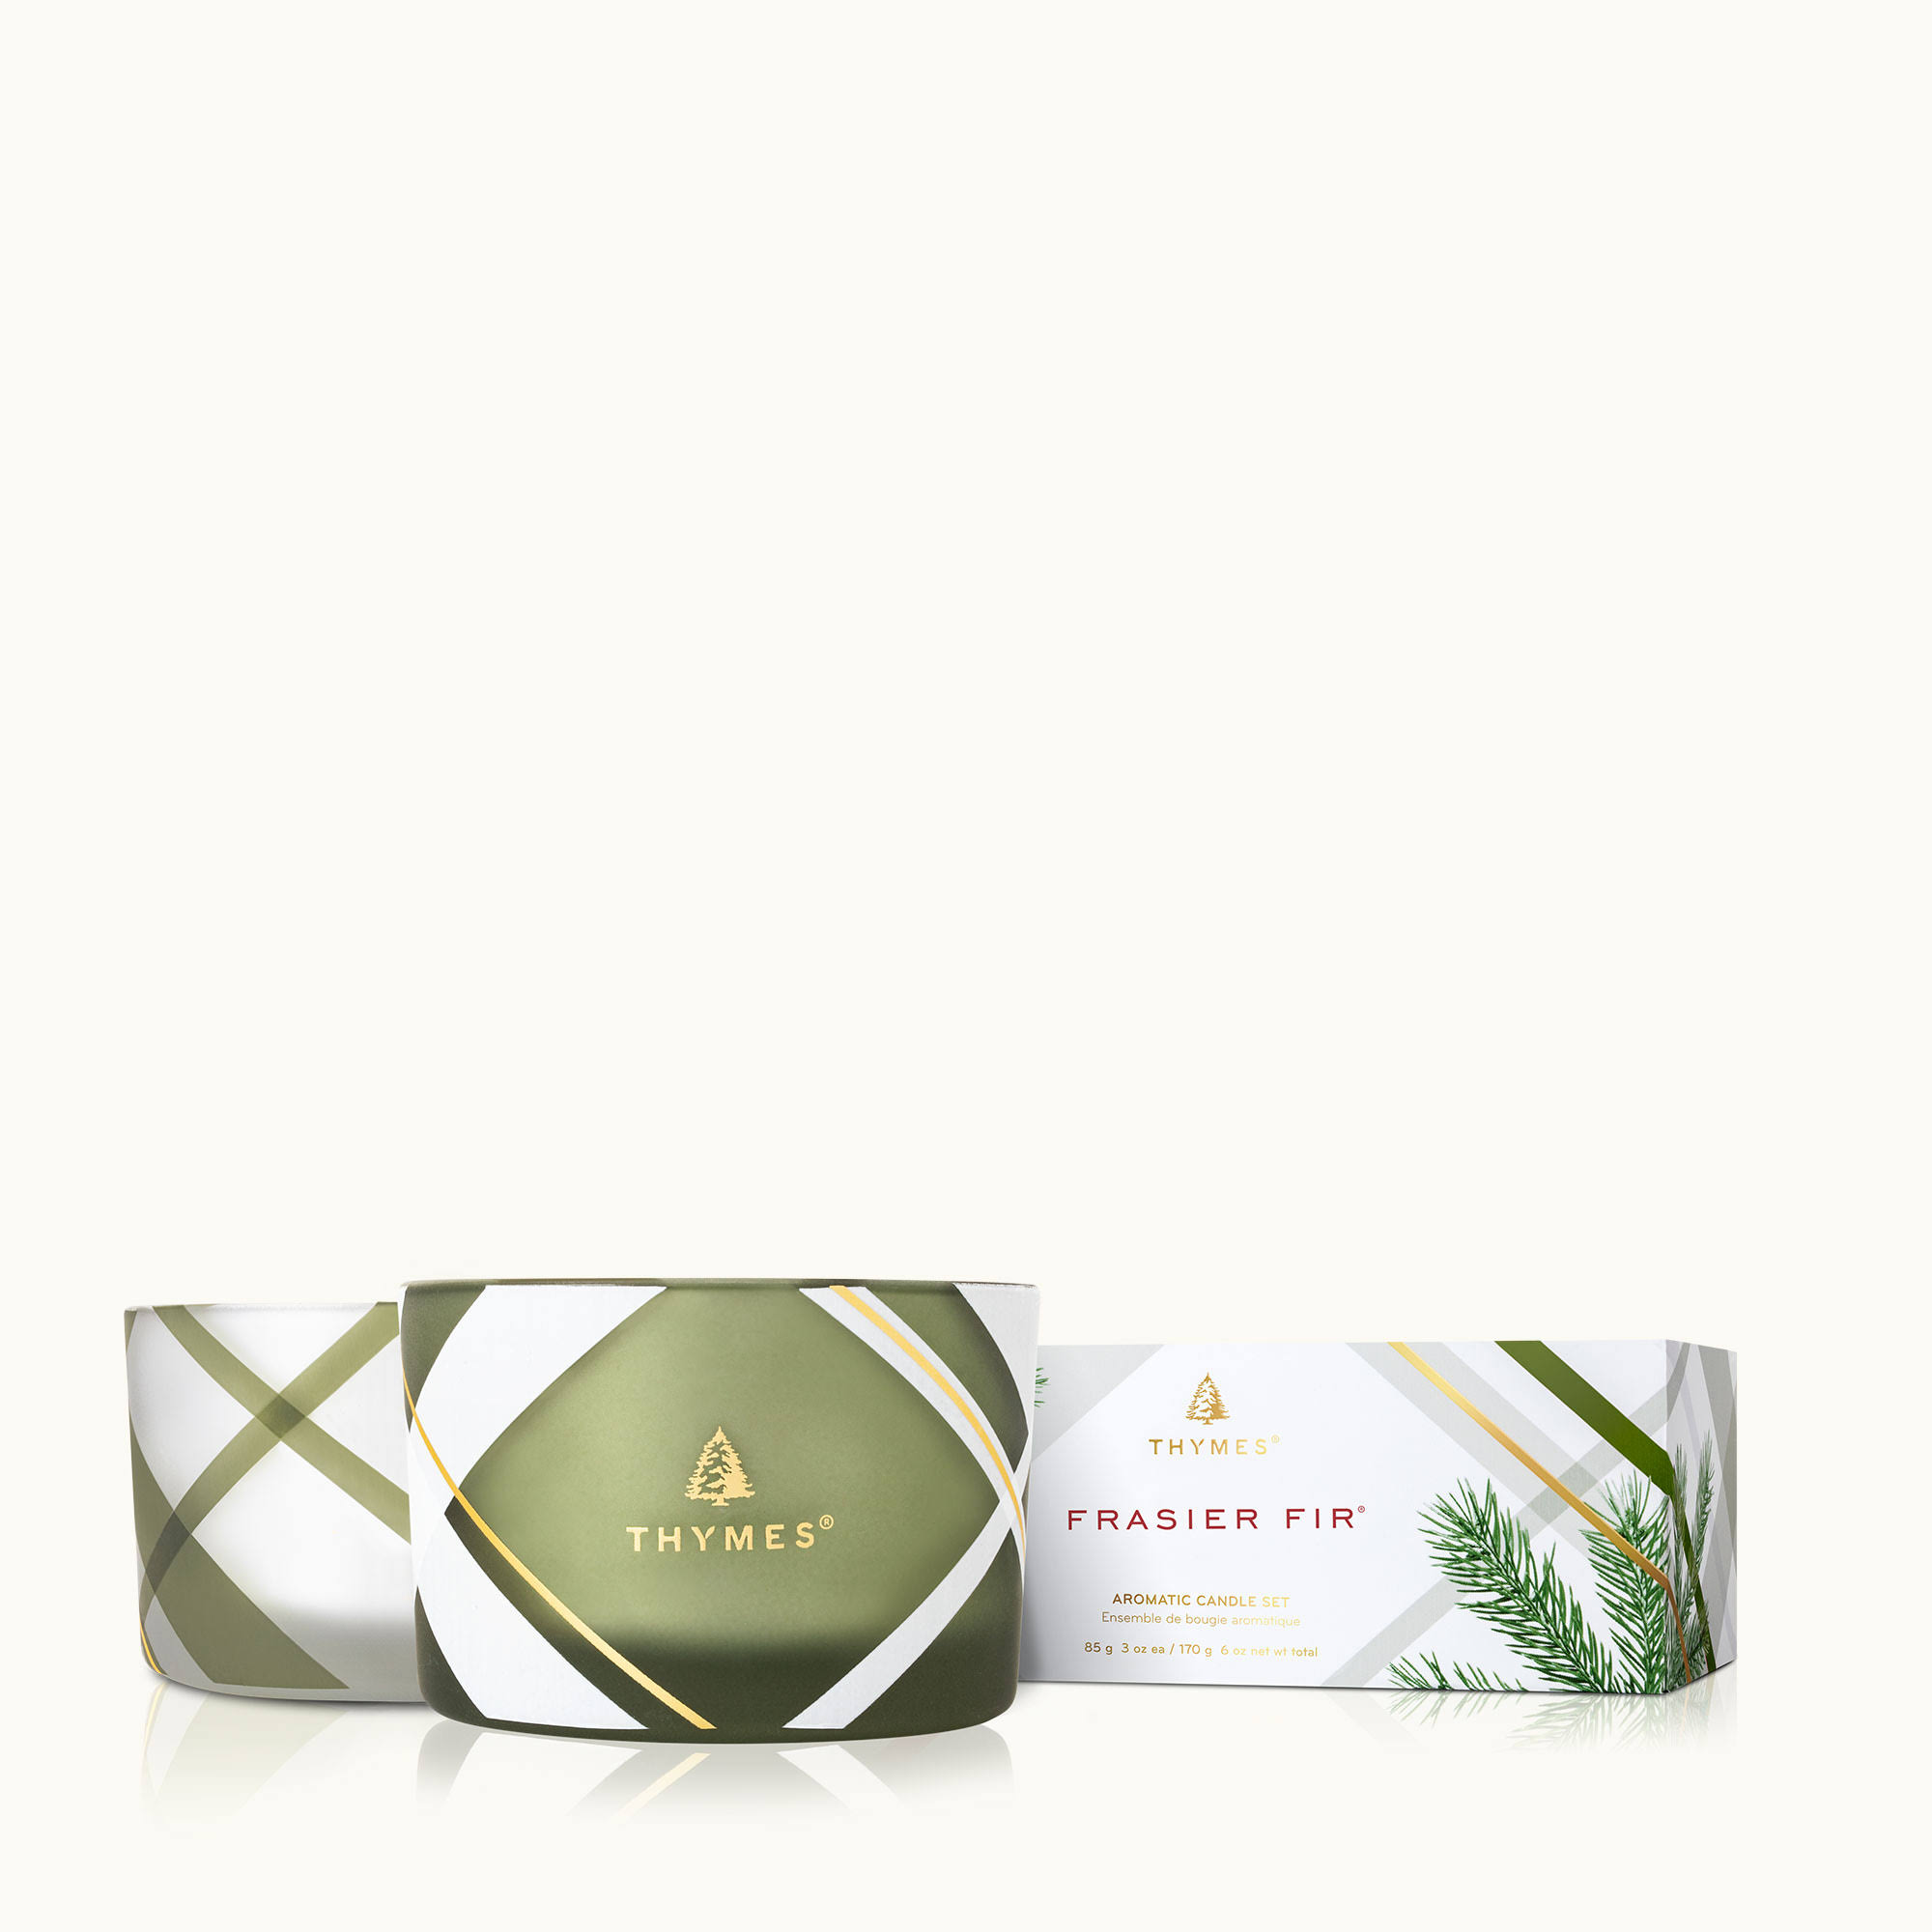 Thymes Frosted Plaid Poured Candle Set Frasier Fir